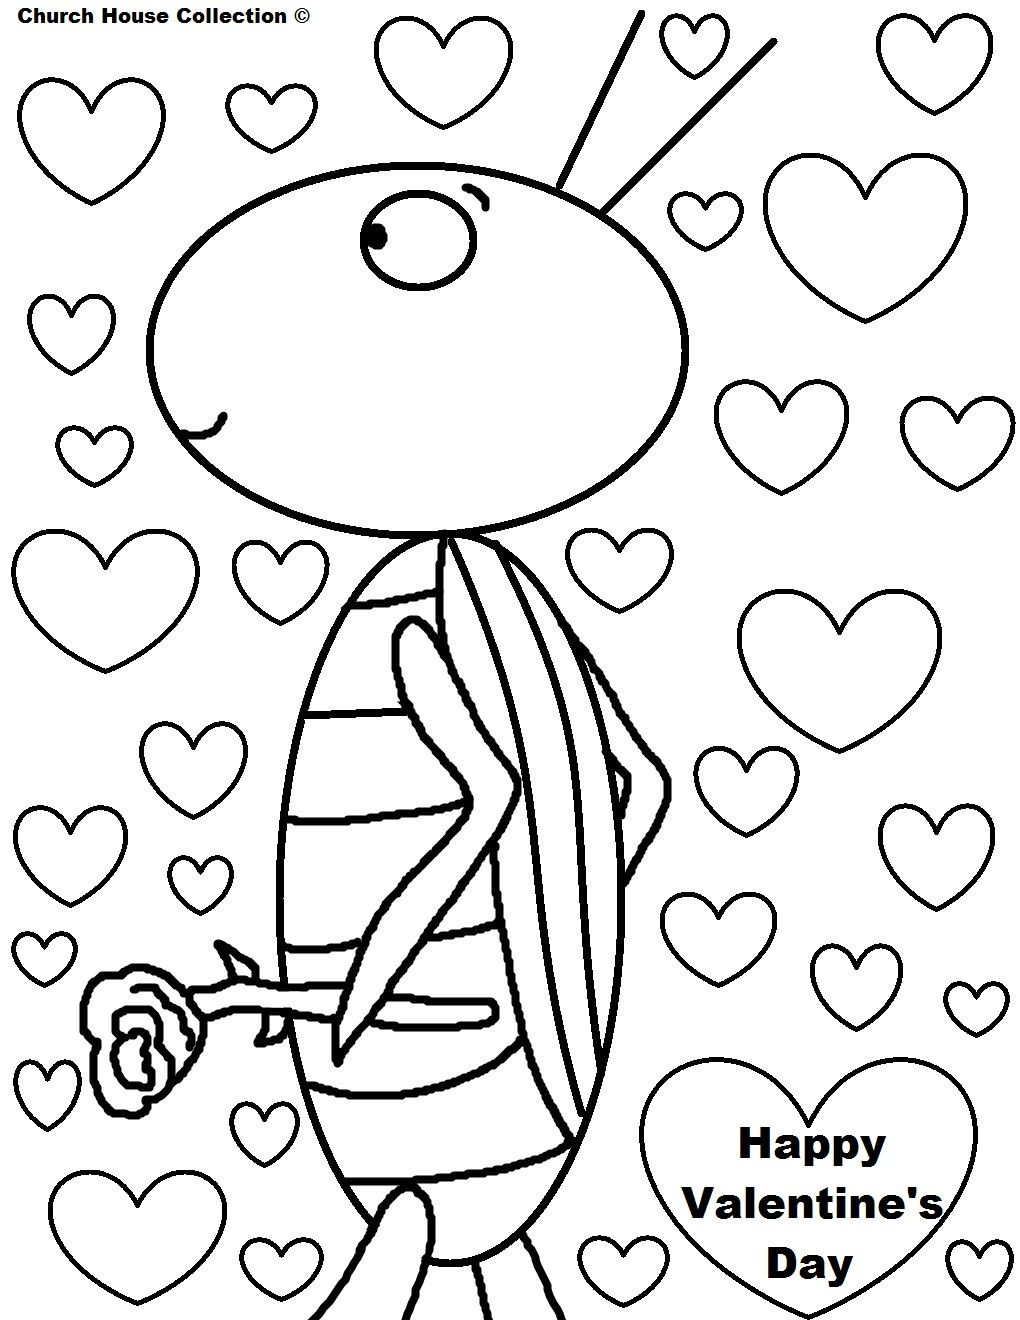 Free Preschool Valentine Coloring Pages